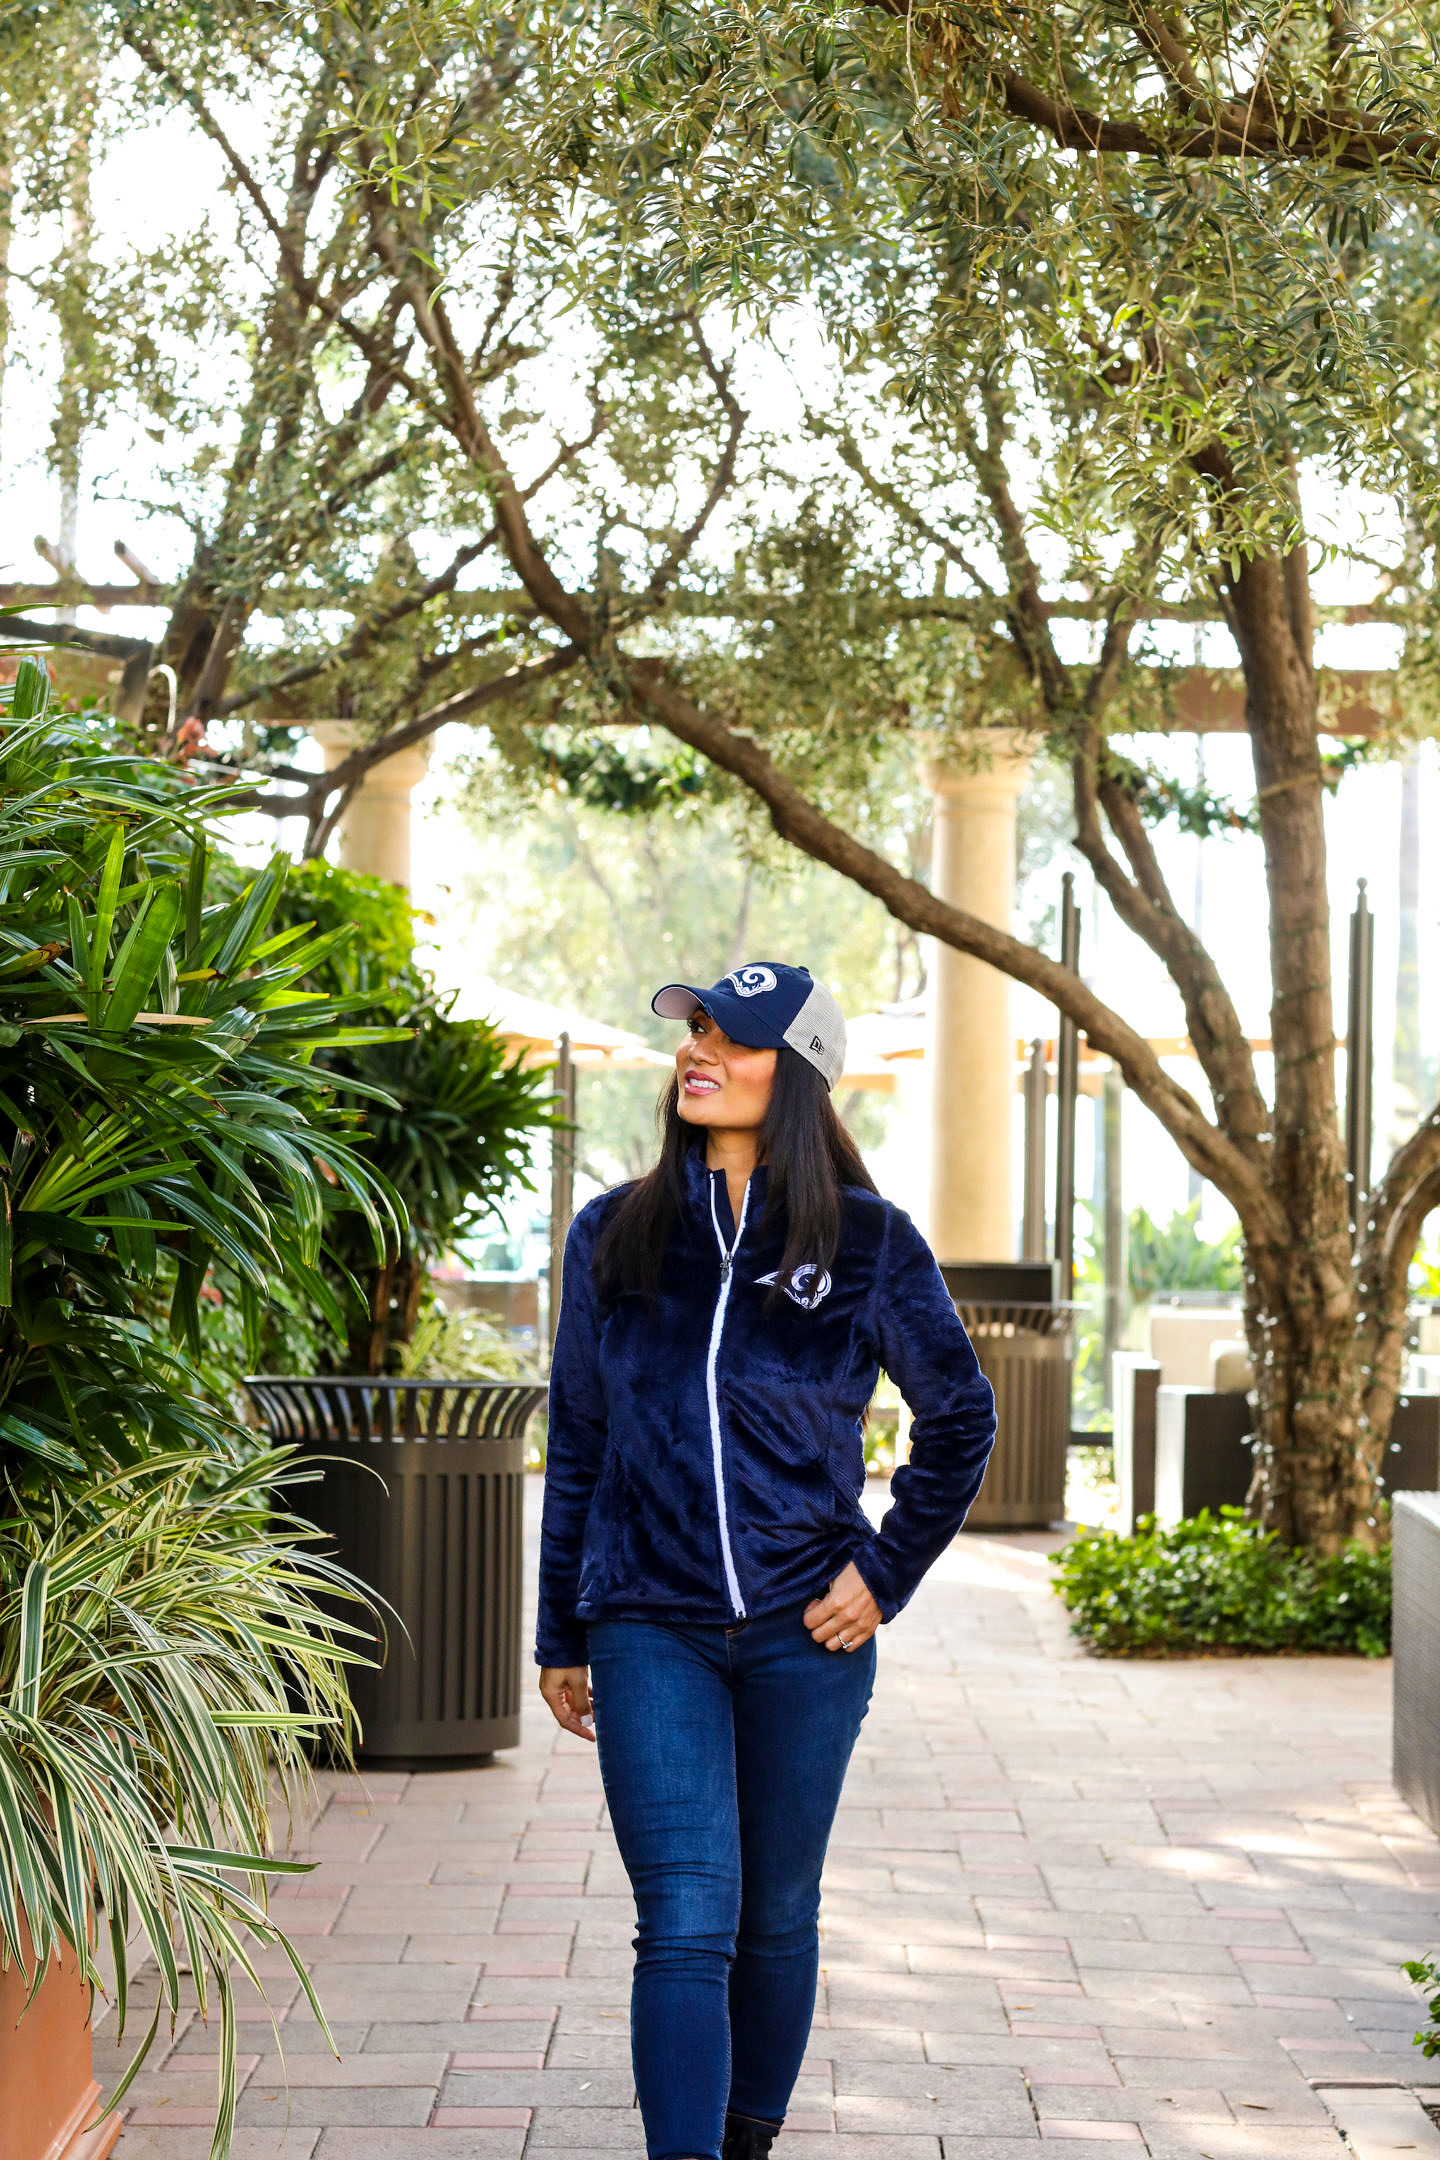 Know someone who is a MAJOR football lover? Orange County Blogger Glamorous Versatility is sharing her favorite NFL apparel ideas to give to any football lover this playoff season. Click to see them here!